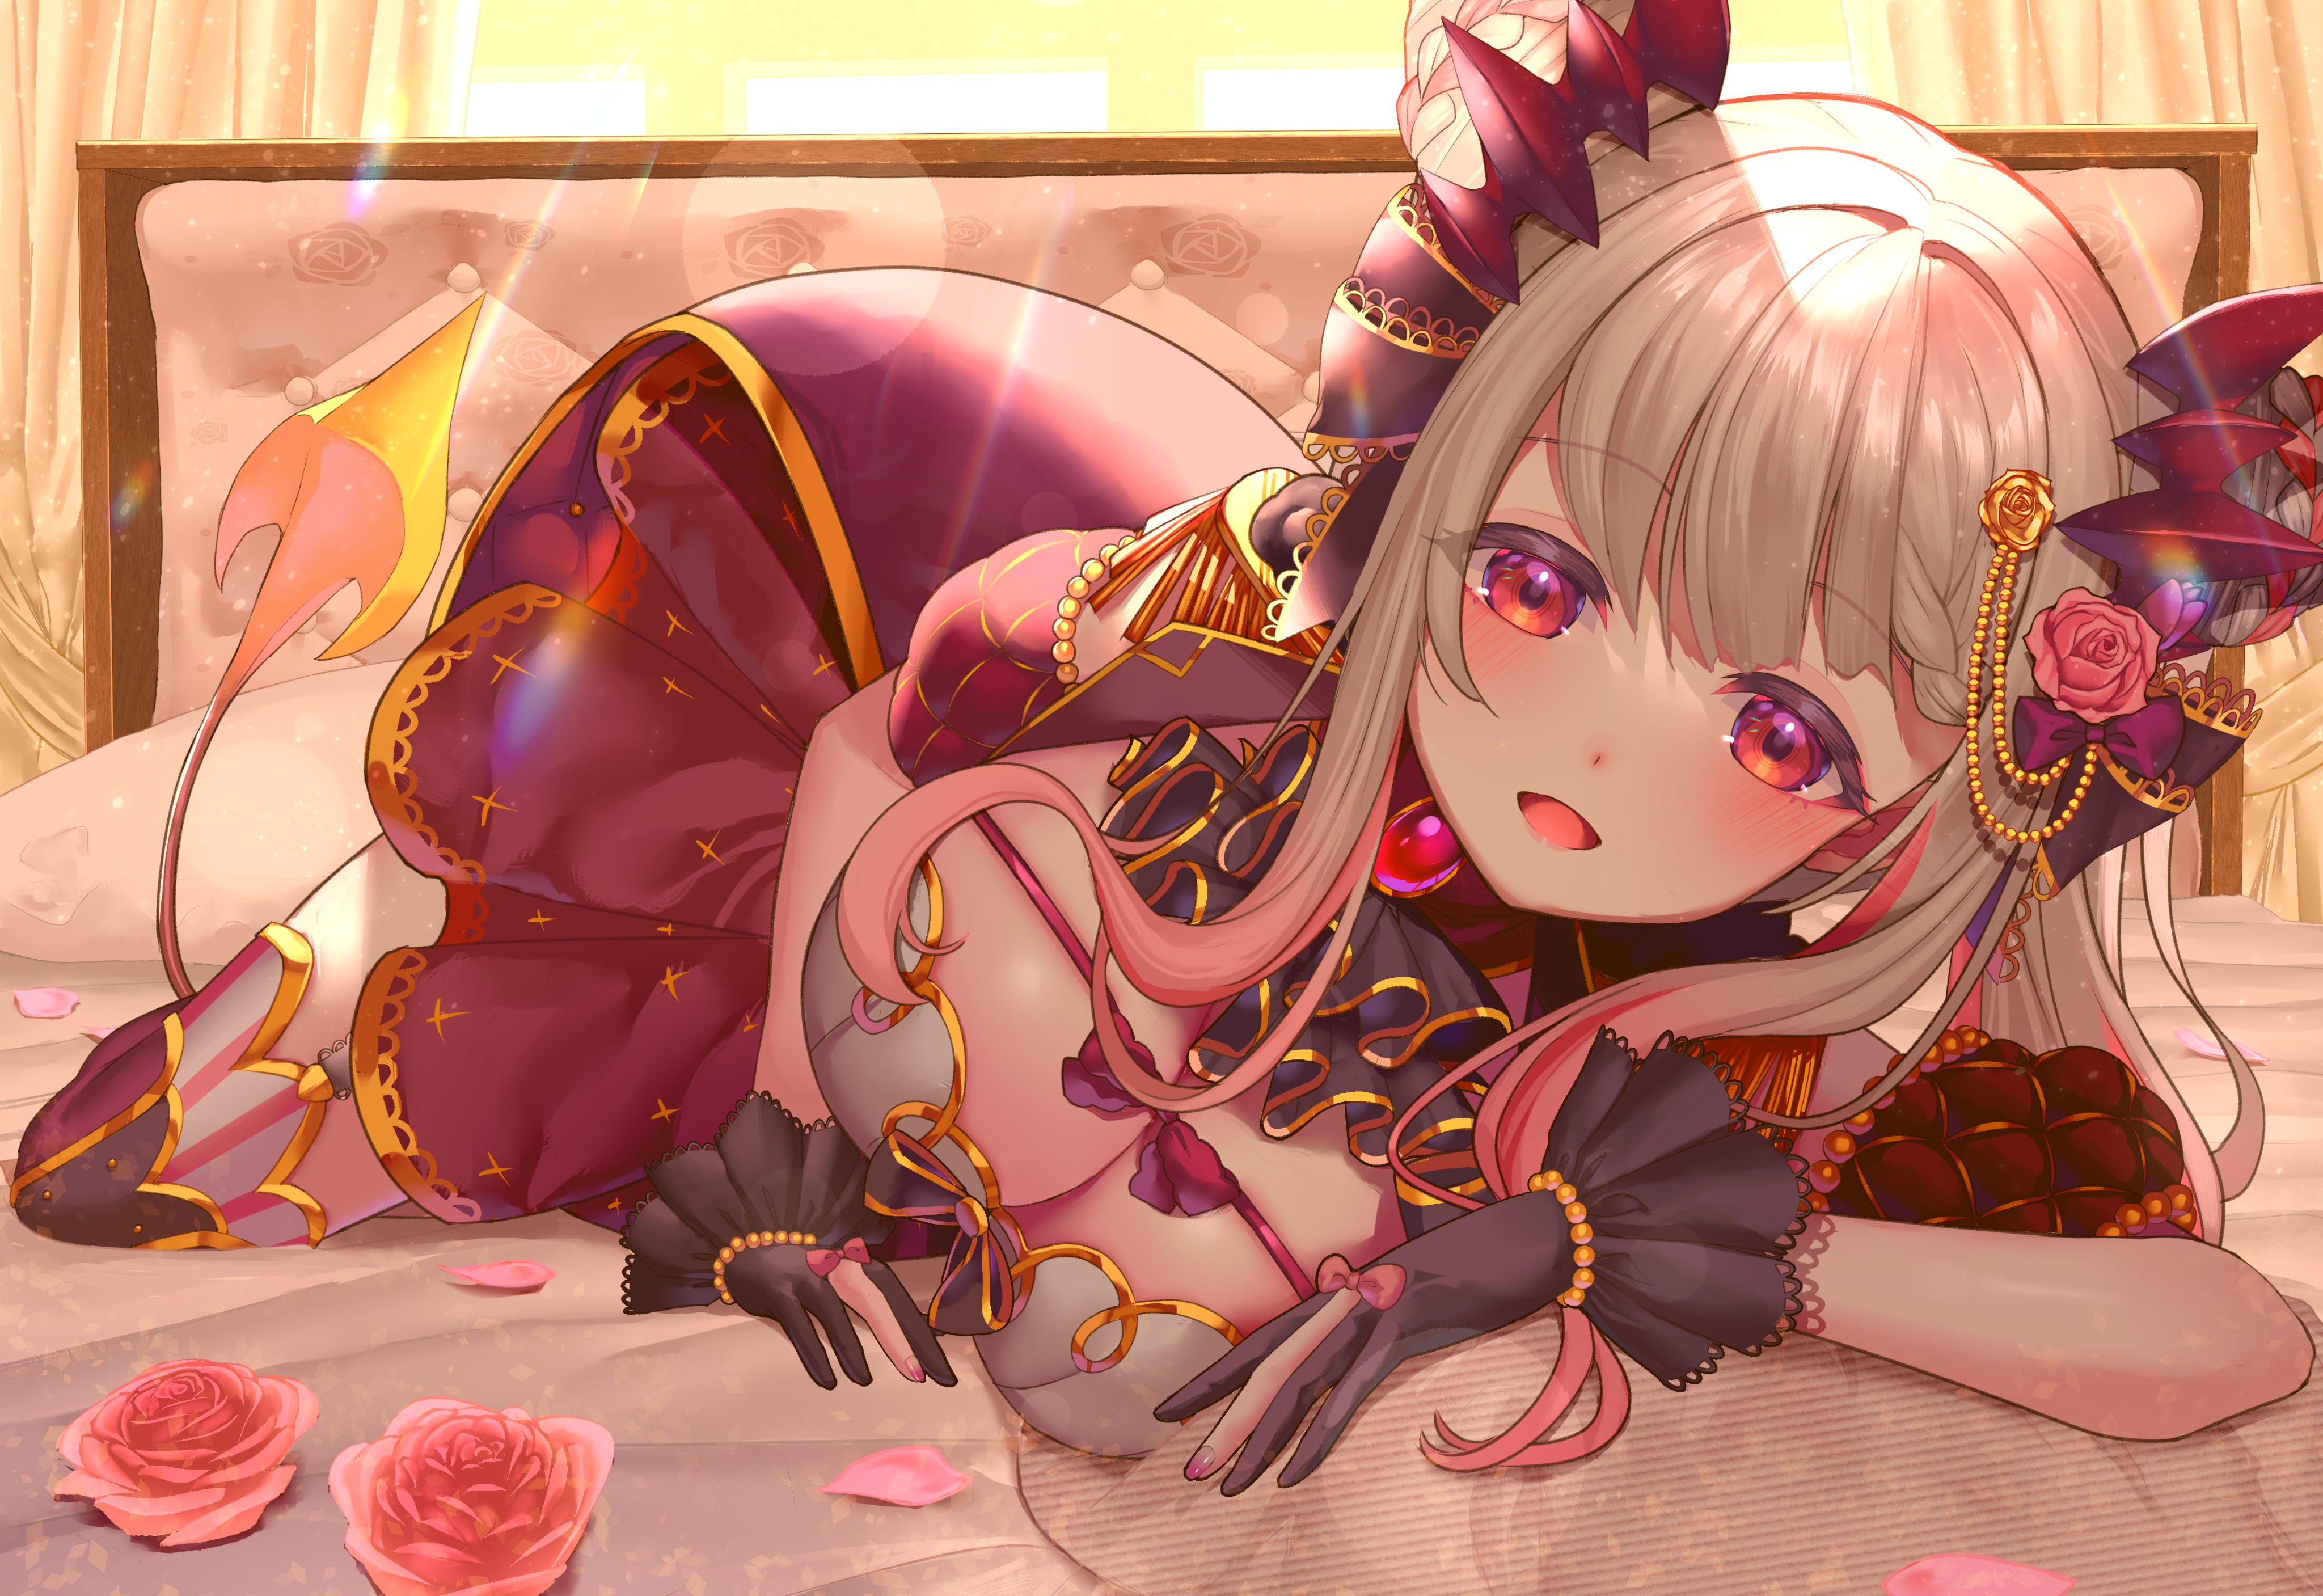 Anime 4096x2814 anime anime girls Suou Patra (Honey Strap) Honey Strap cleavage rose petals lying on front gloves big boobs